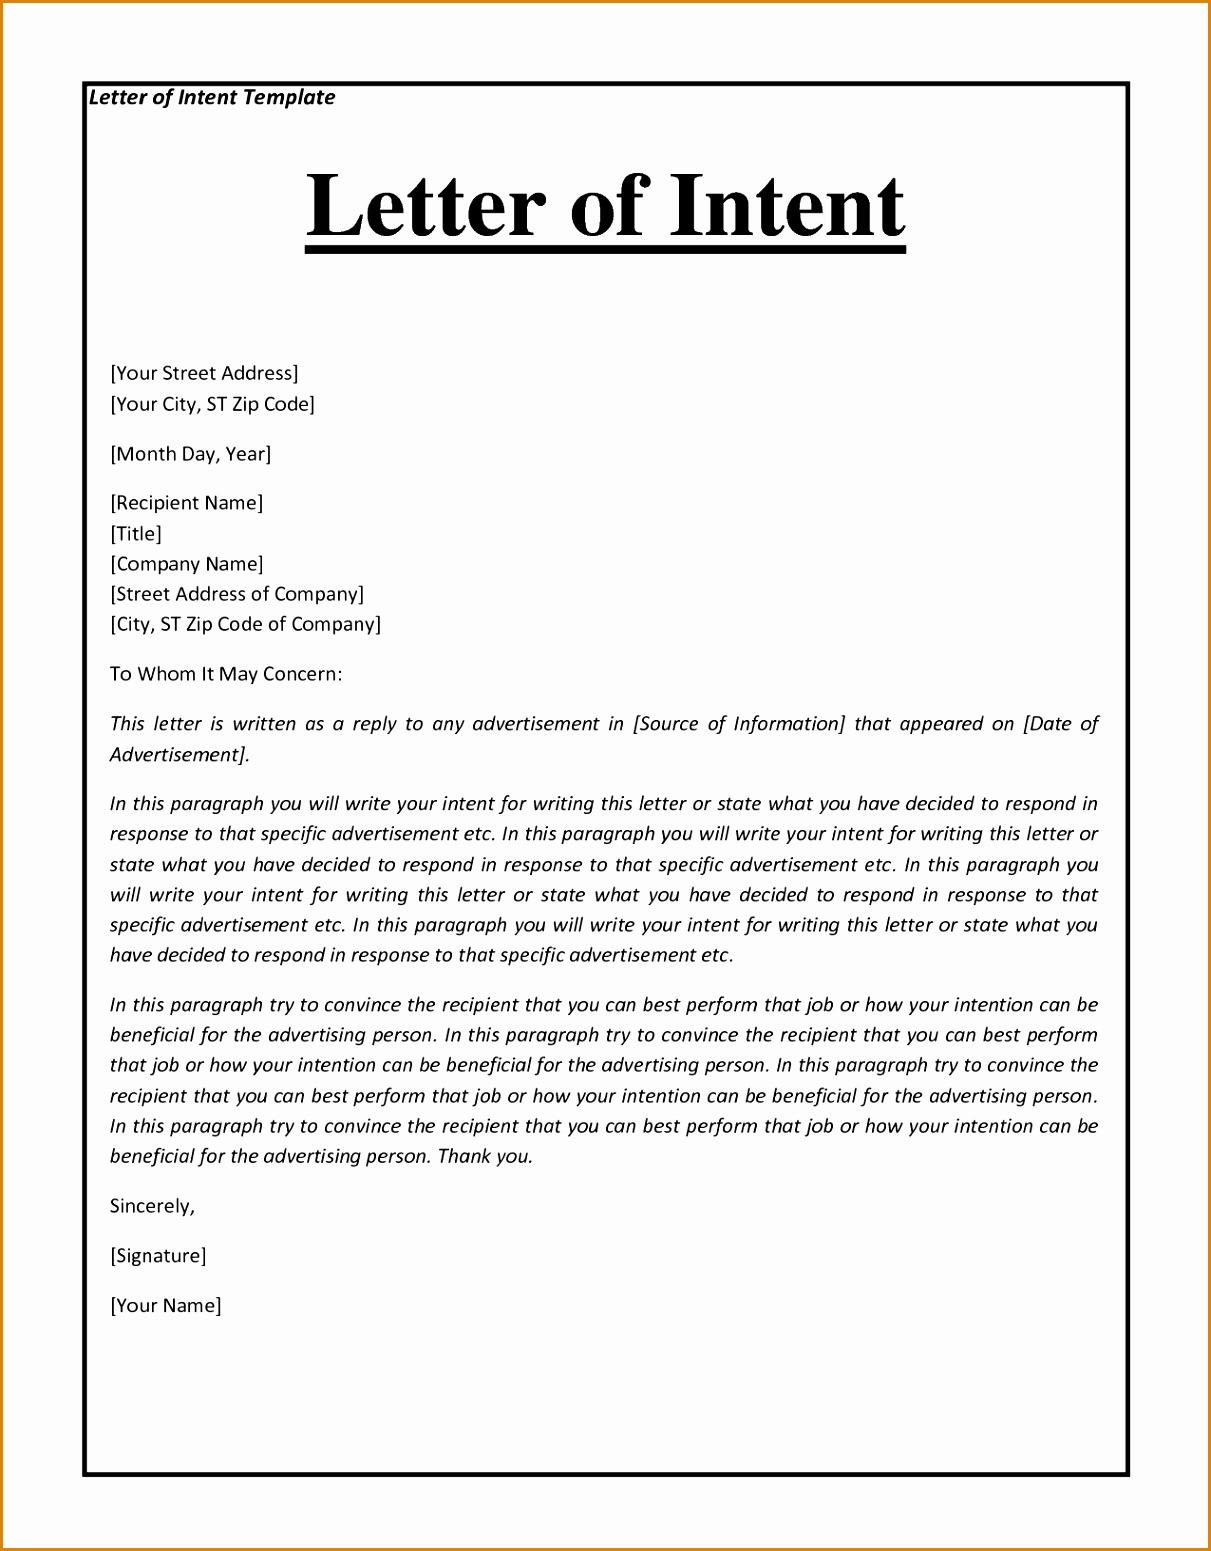 Homeschool Letter Of Intent Template Samples | Letter Template Collection